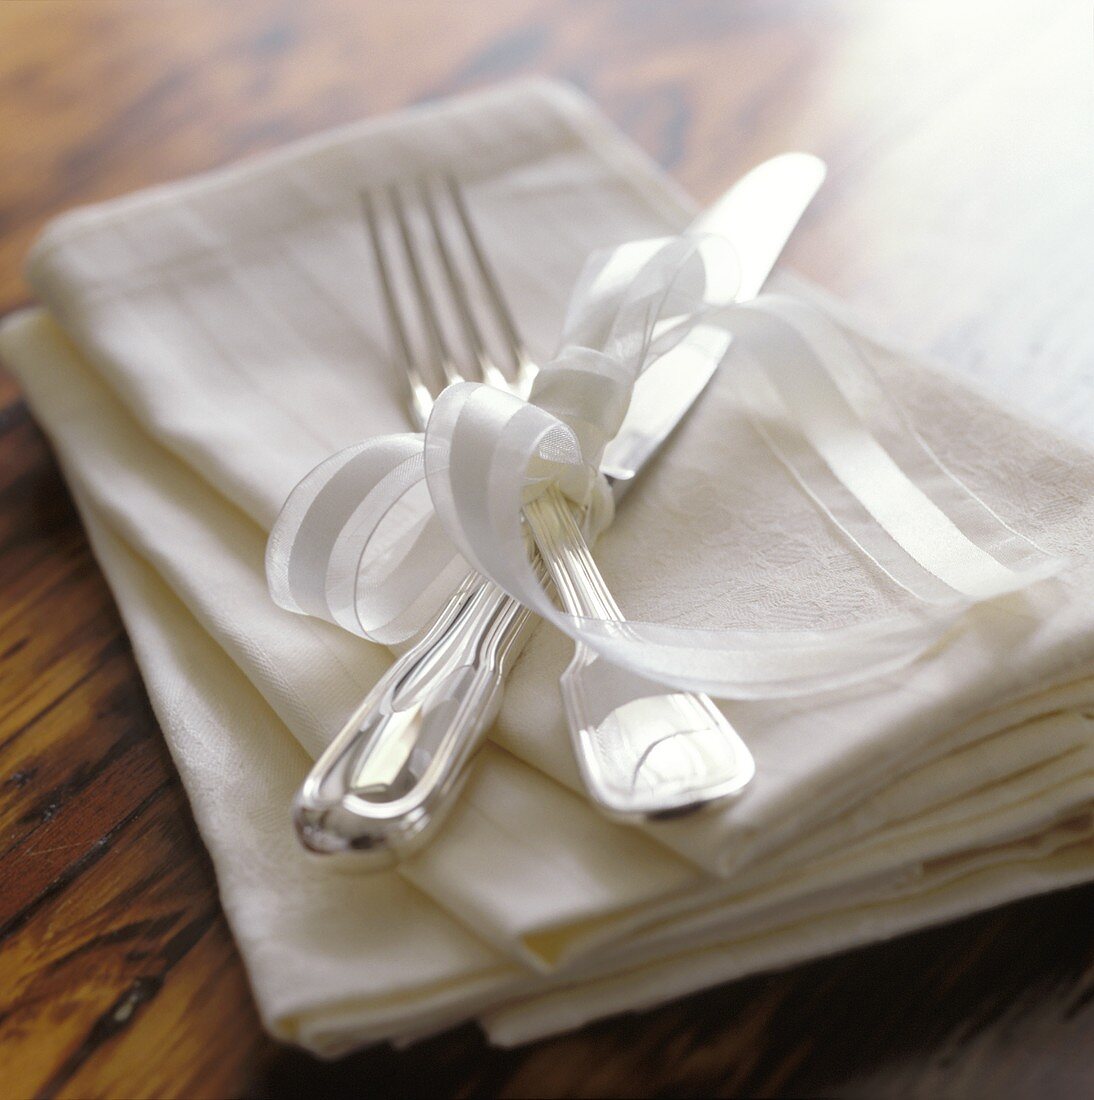 Silver cutlery with white bow on napkins